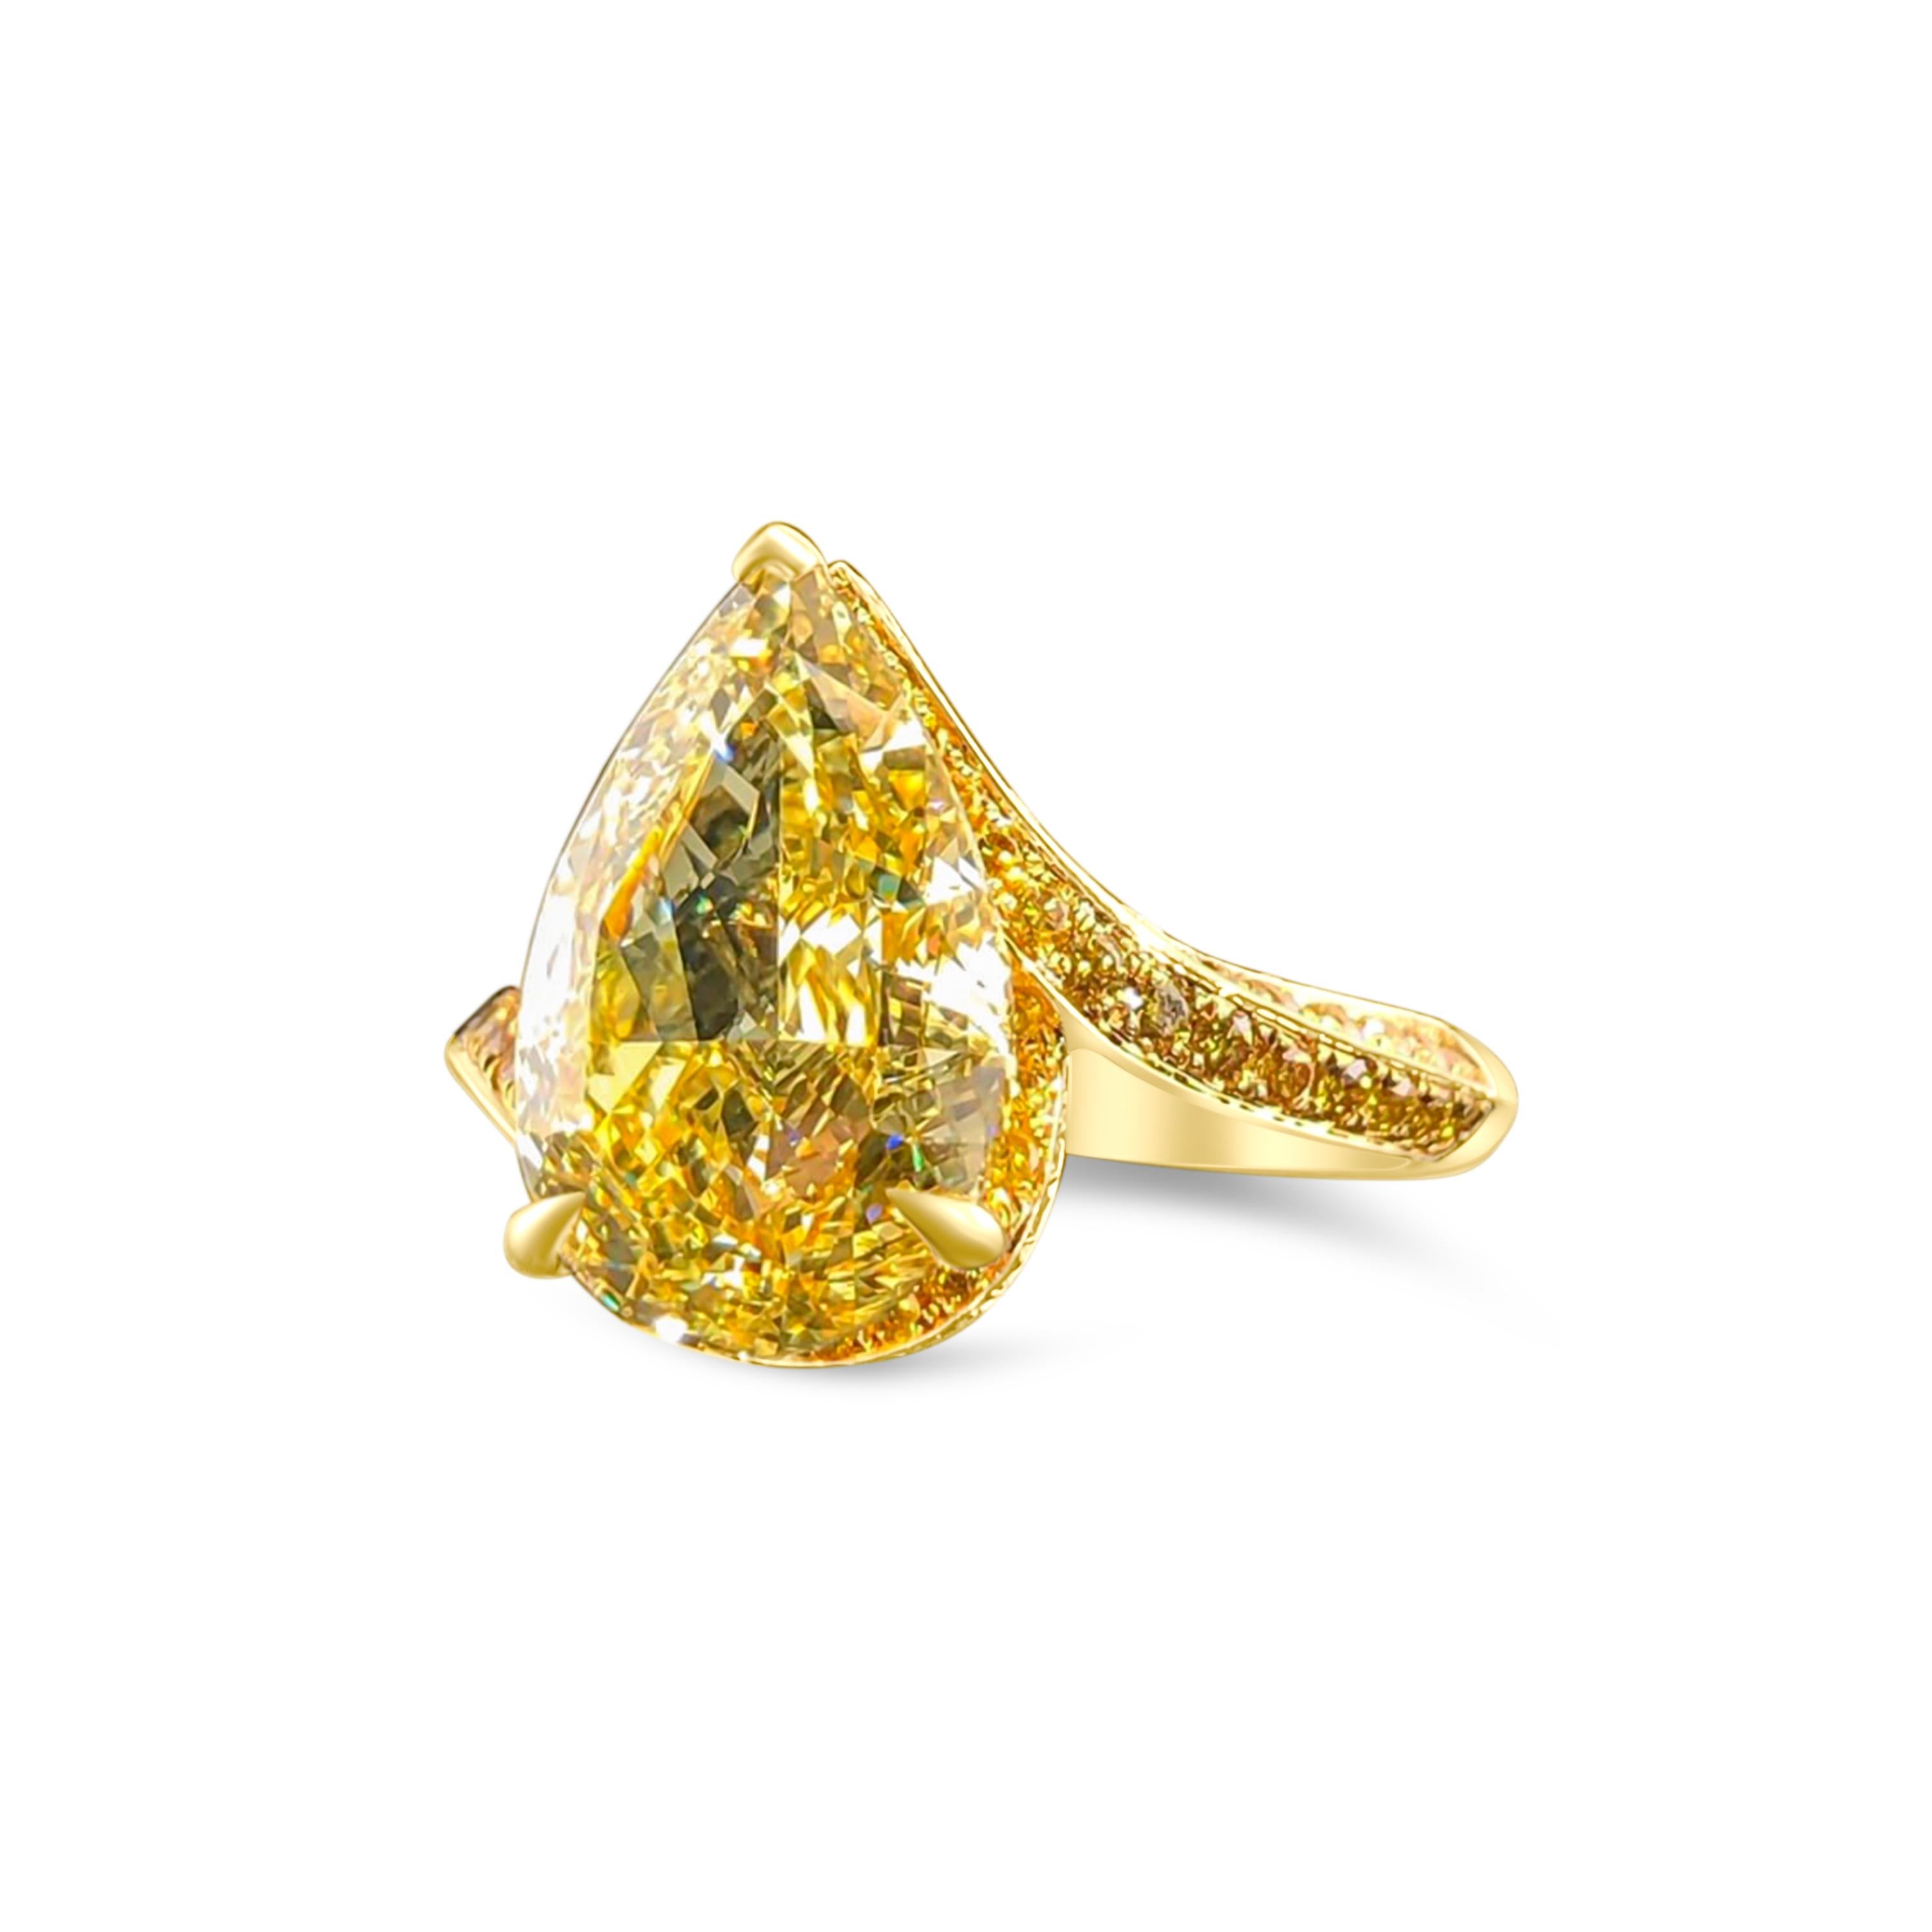 We invite you to discover this elegant and minimalist engagement ring set with a 5,23 carat GIA certified Fancy Light Brownish Yellow pear diamond. The asymmetry of its ring will add a touch of originality to this magnificent jewel

New ring 
Main